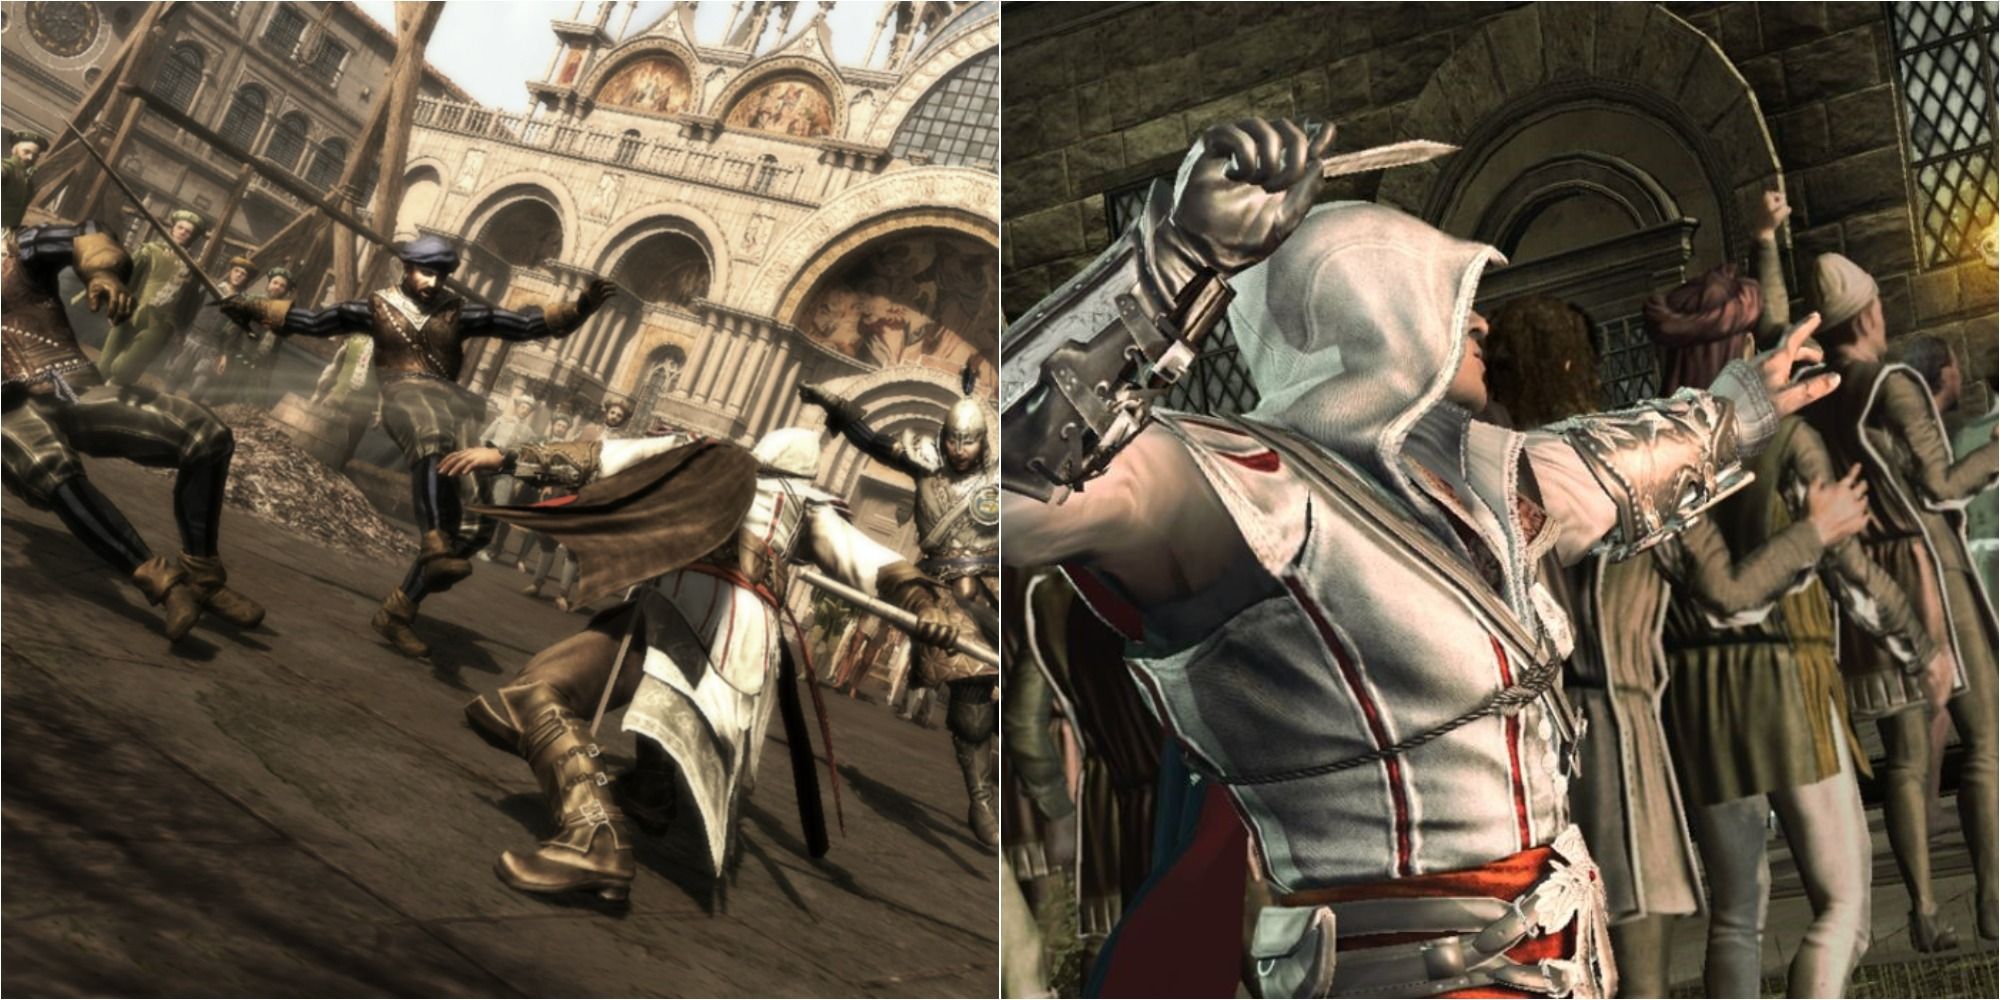 Assassin's Creed Ezio Collection - The Acclaimed Trilogy (Inc. AC